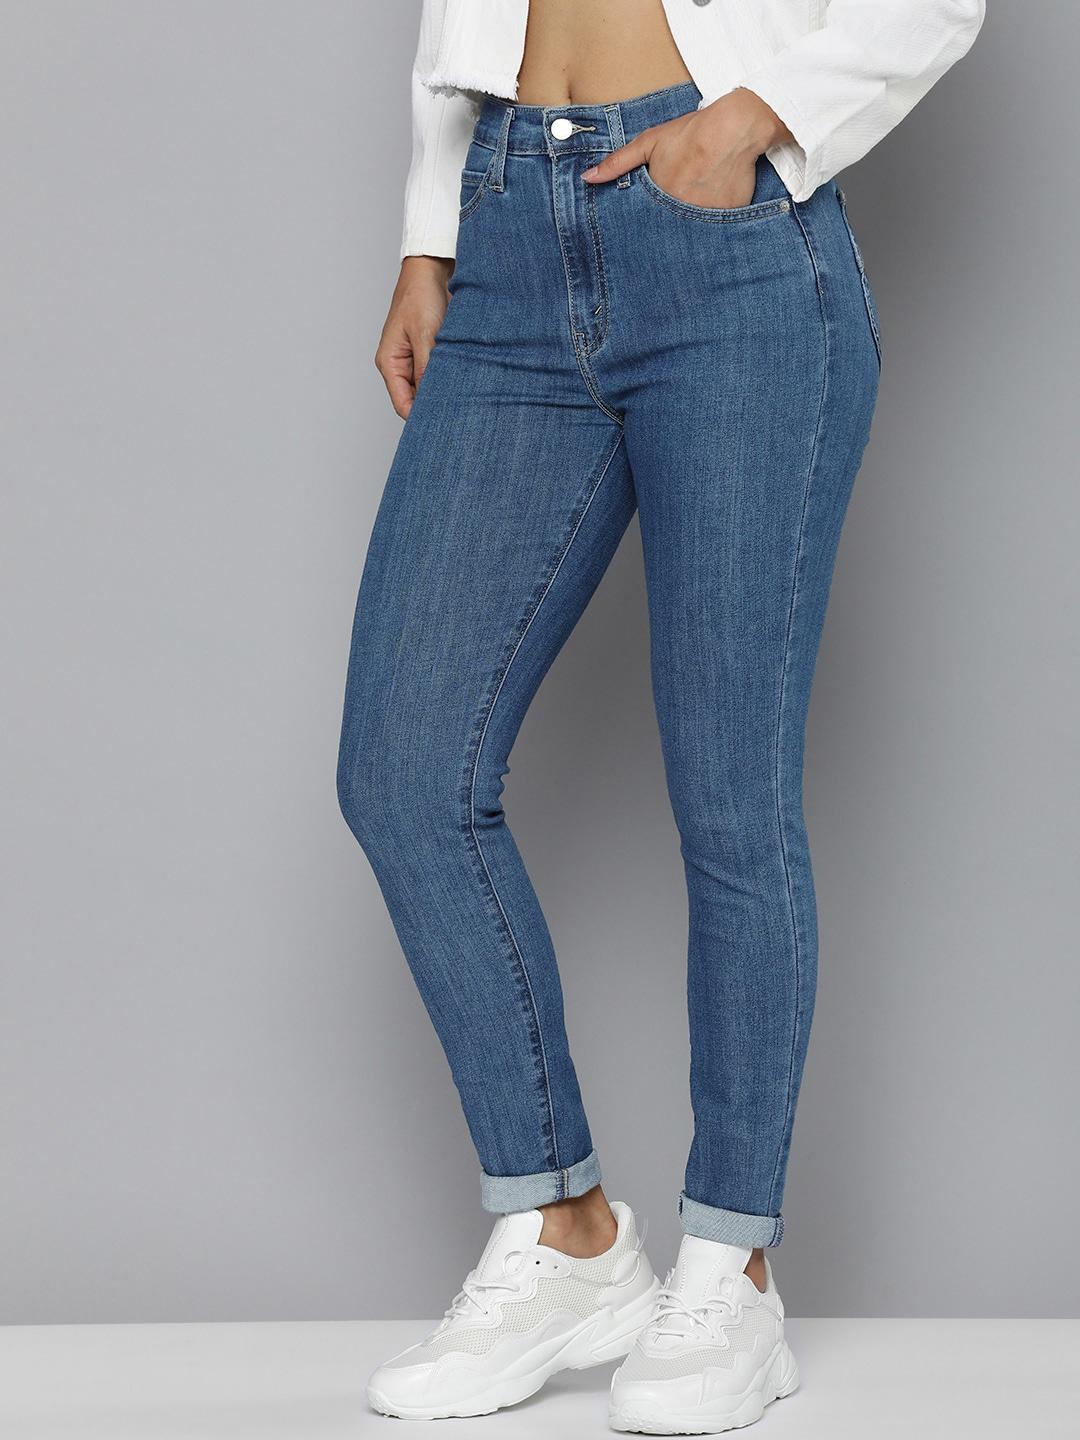 Levis Women Retro High Skinny Fit High-Rise Stretchable Jeans